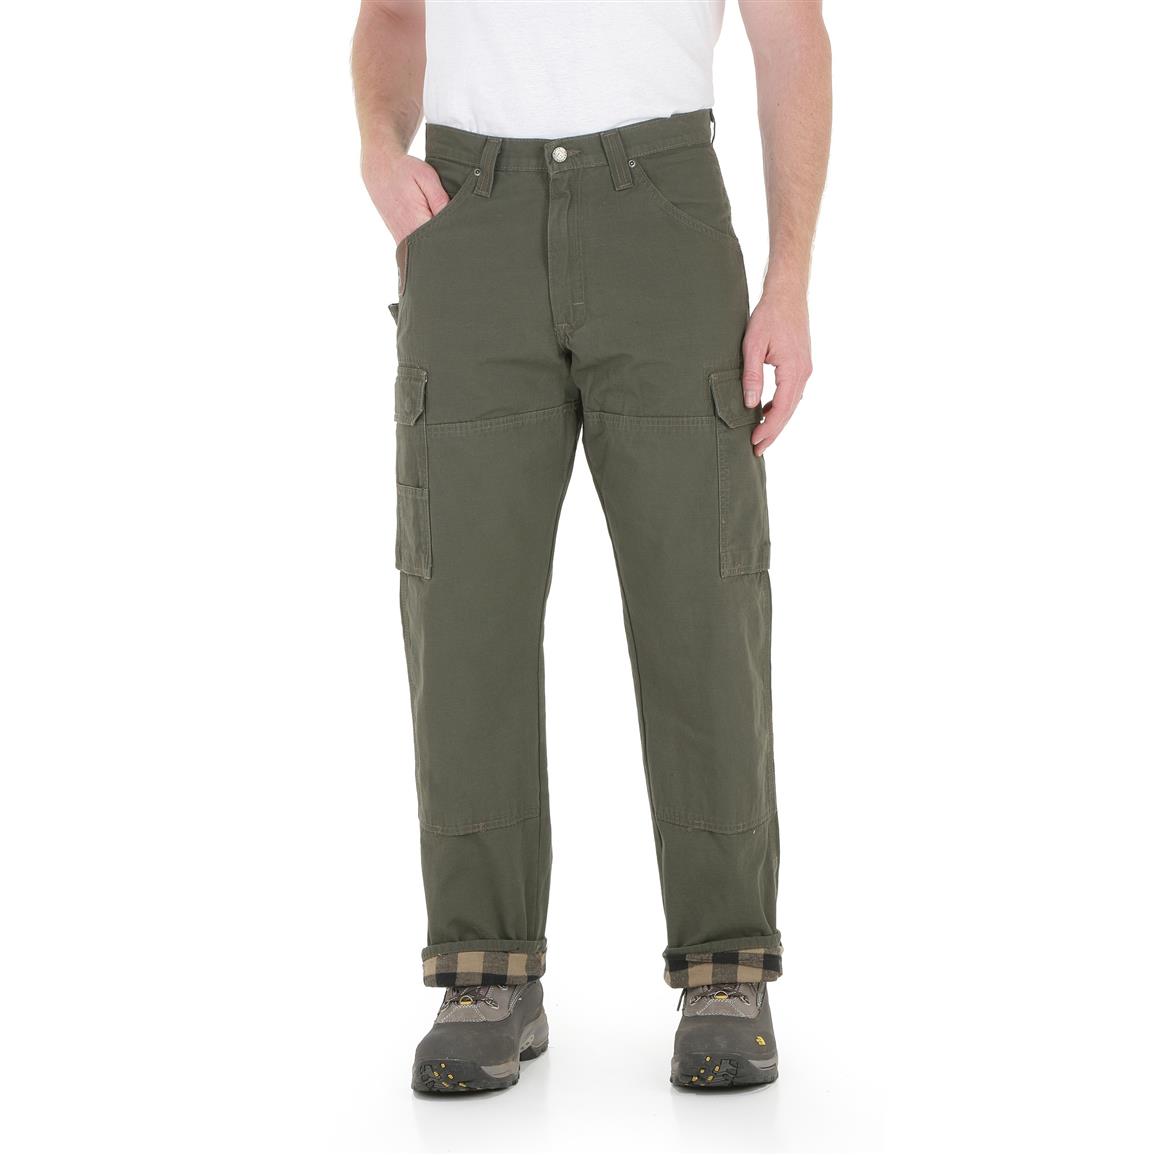 riggs insulated work pants